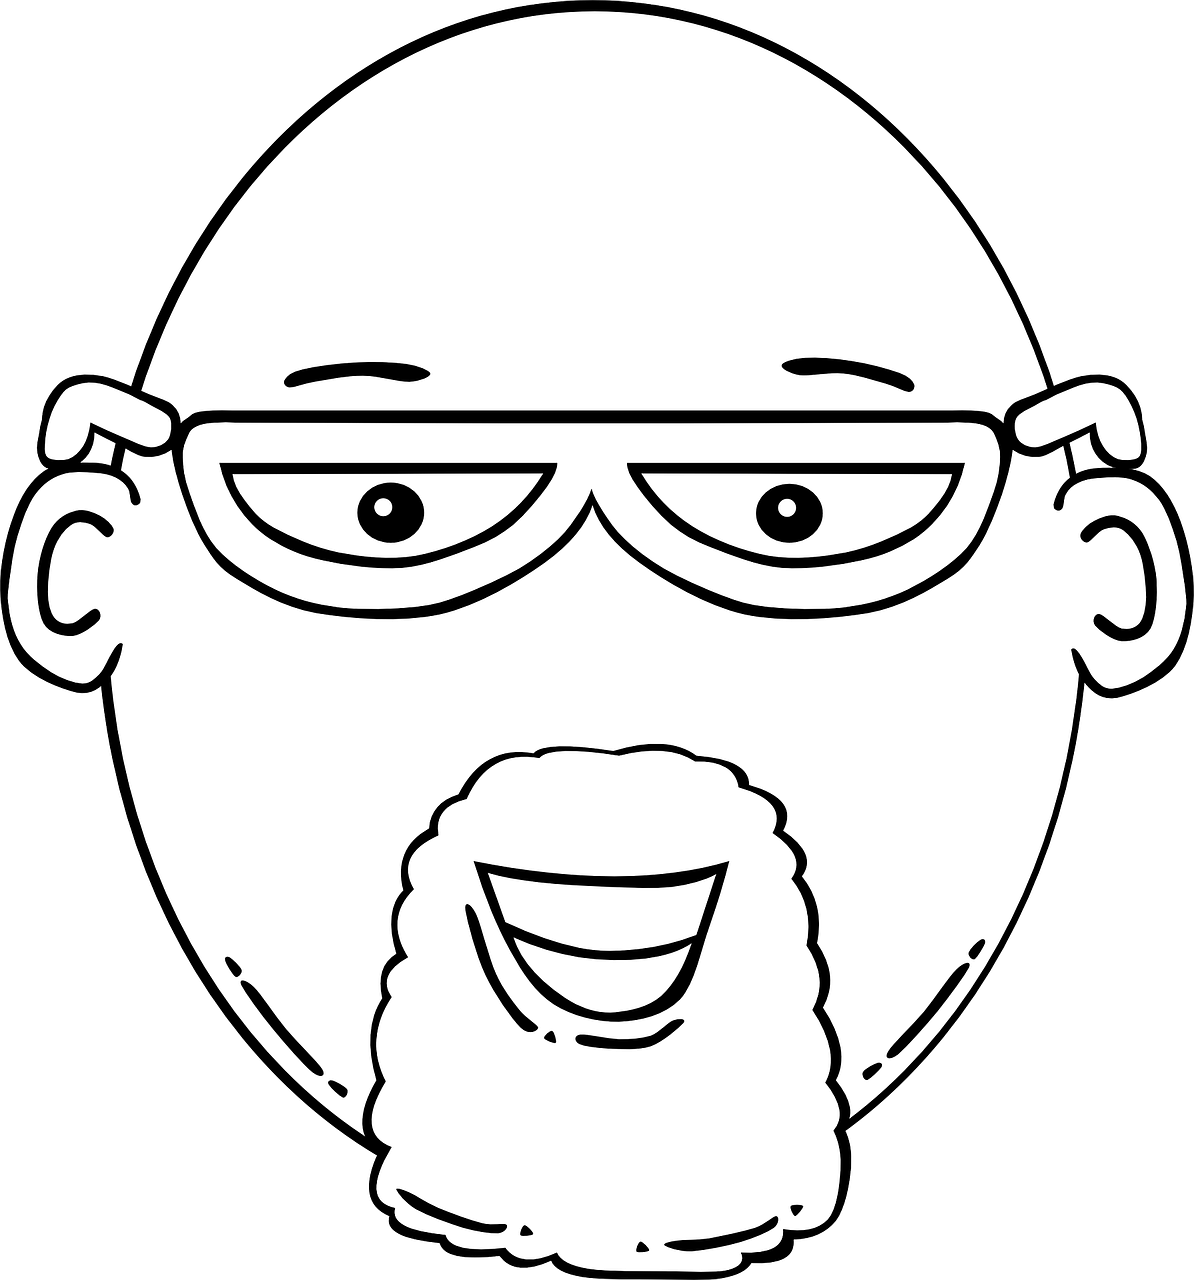 a cartoon man with glasses and a beard, inspired by Leo Leuppi, mingei, clean black outlines, bald head and white beard, expressive happy smug expression, stylized portrait h 1280